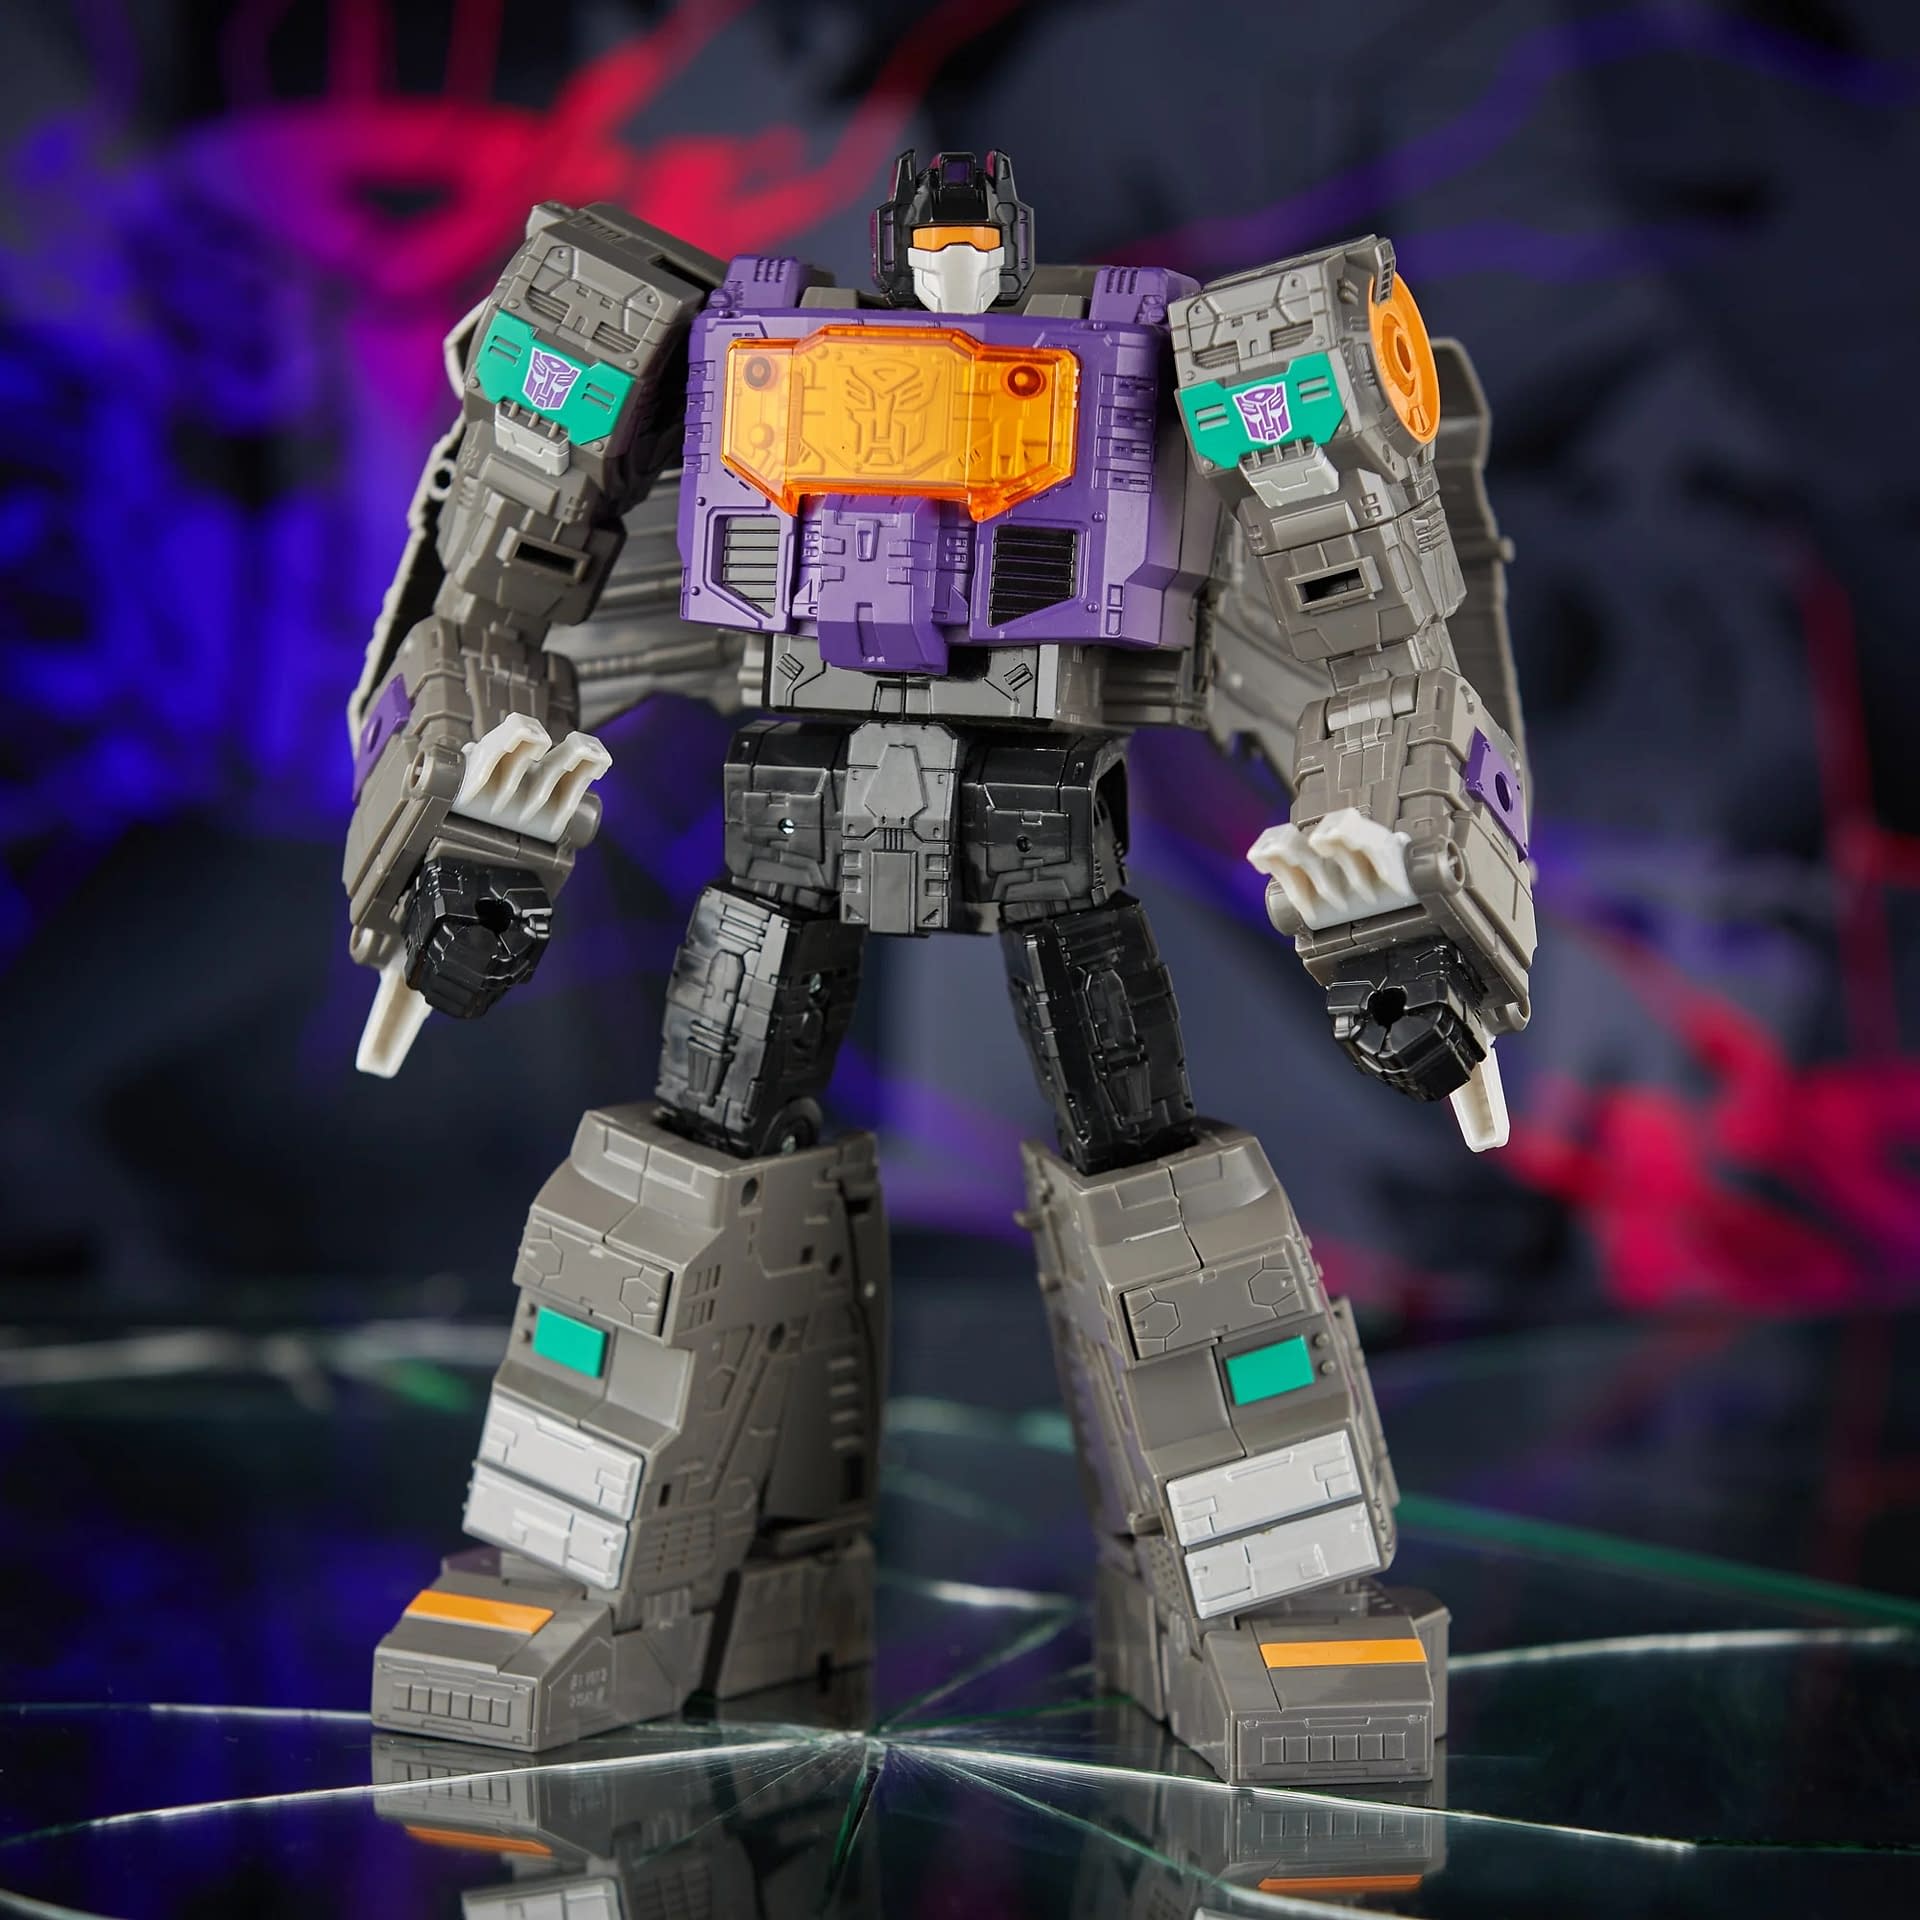  Transformers Shattered Glass Grimlock Enters the Fight from Hasbro